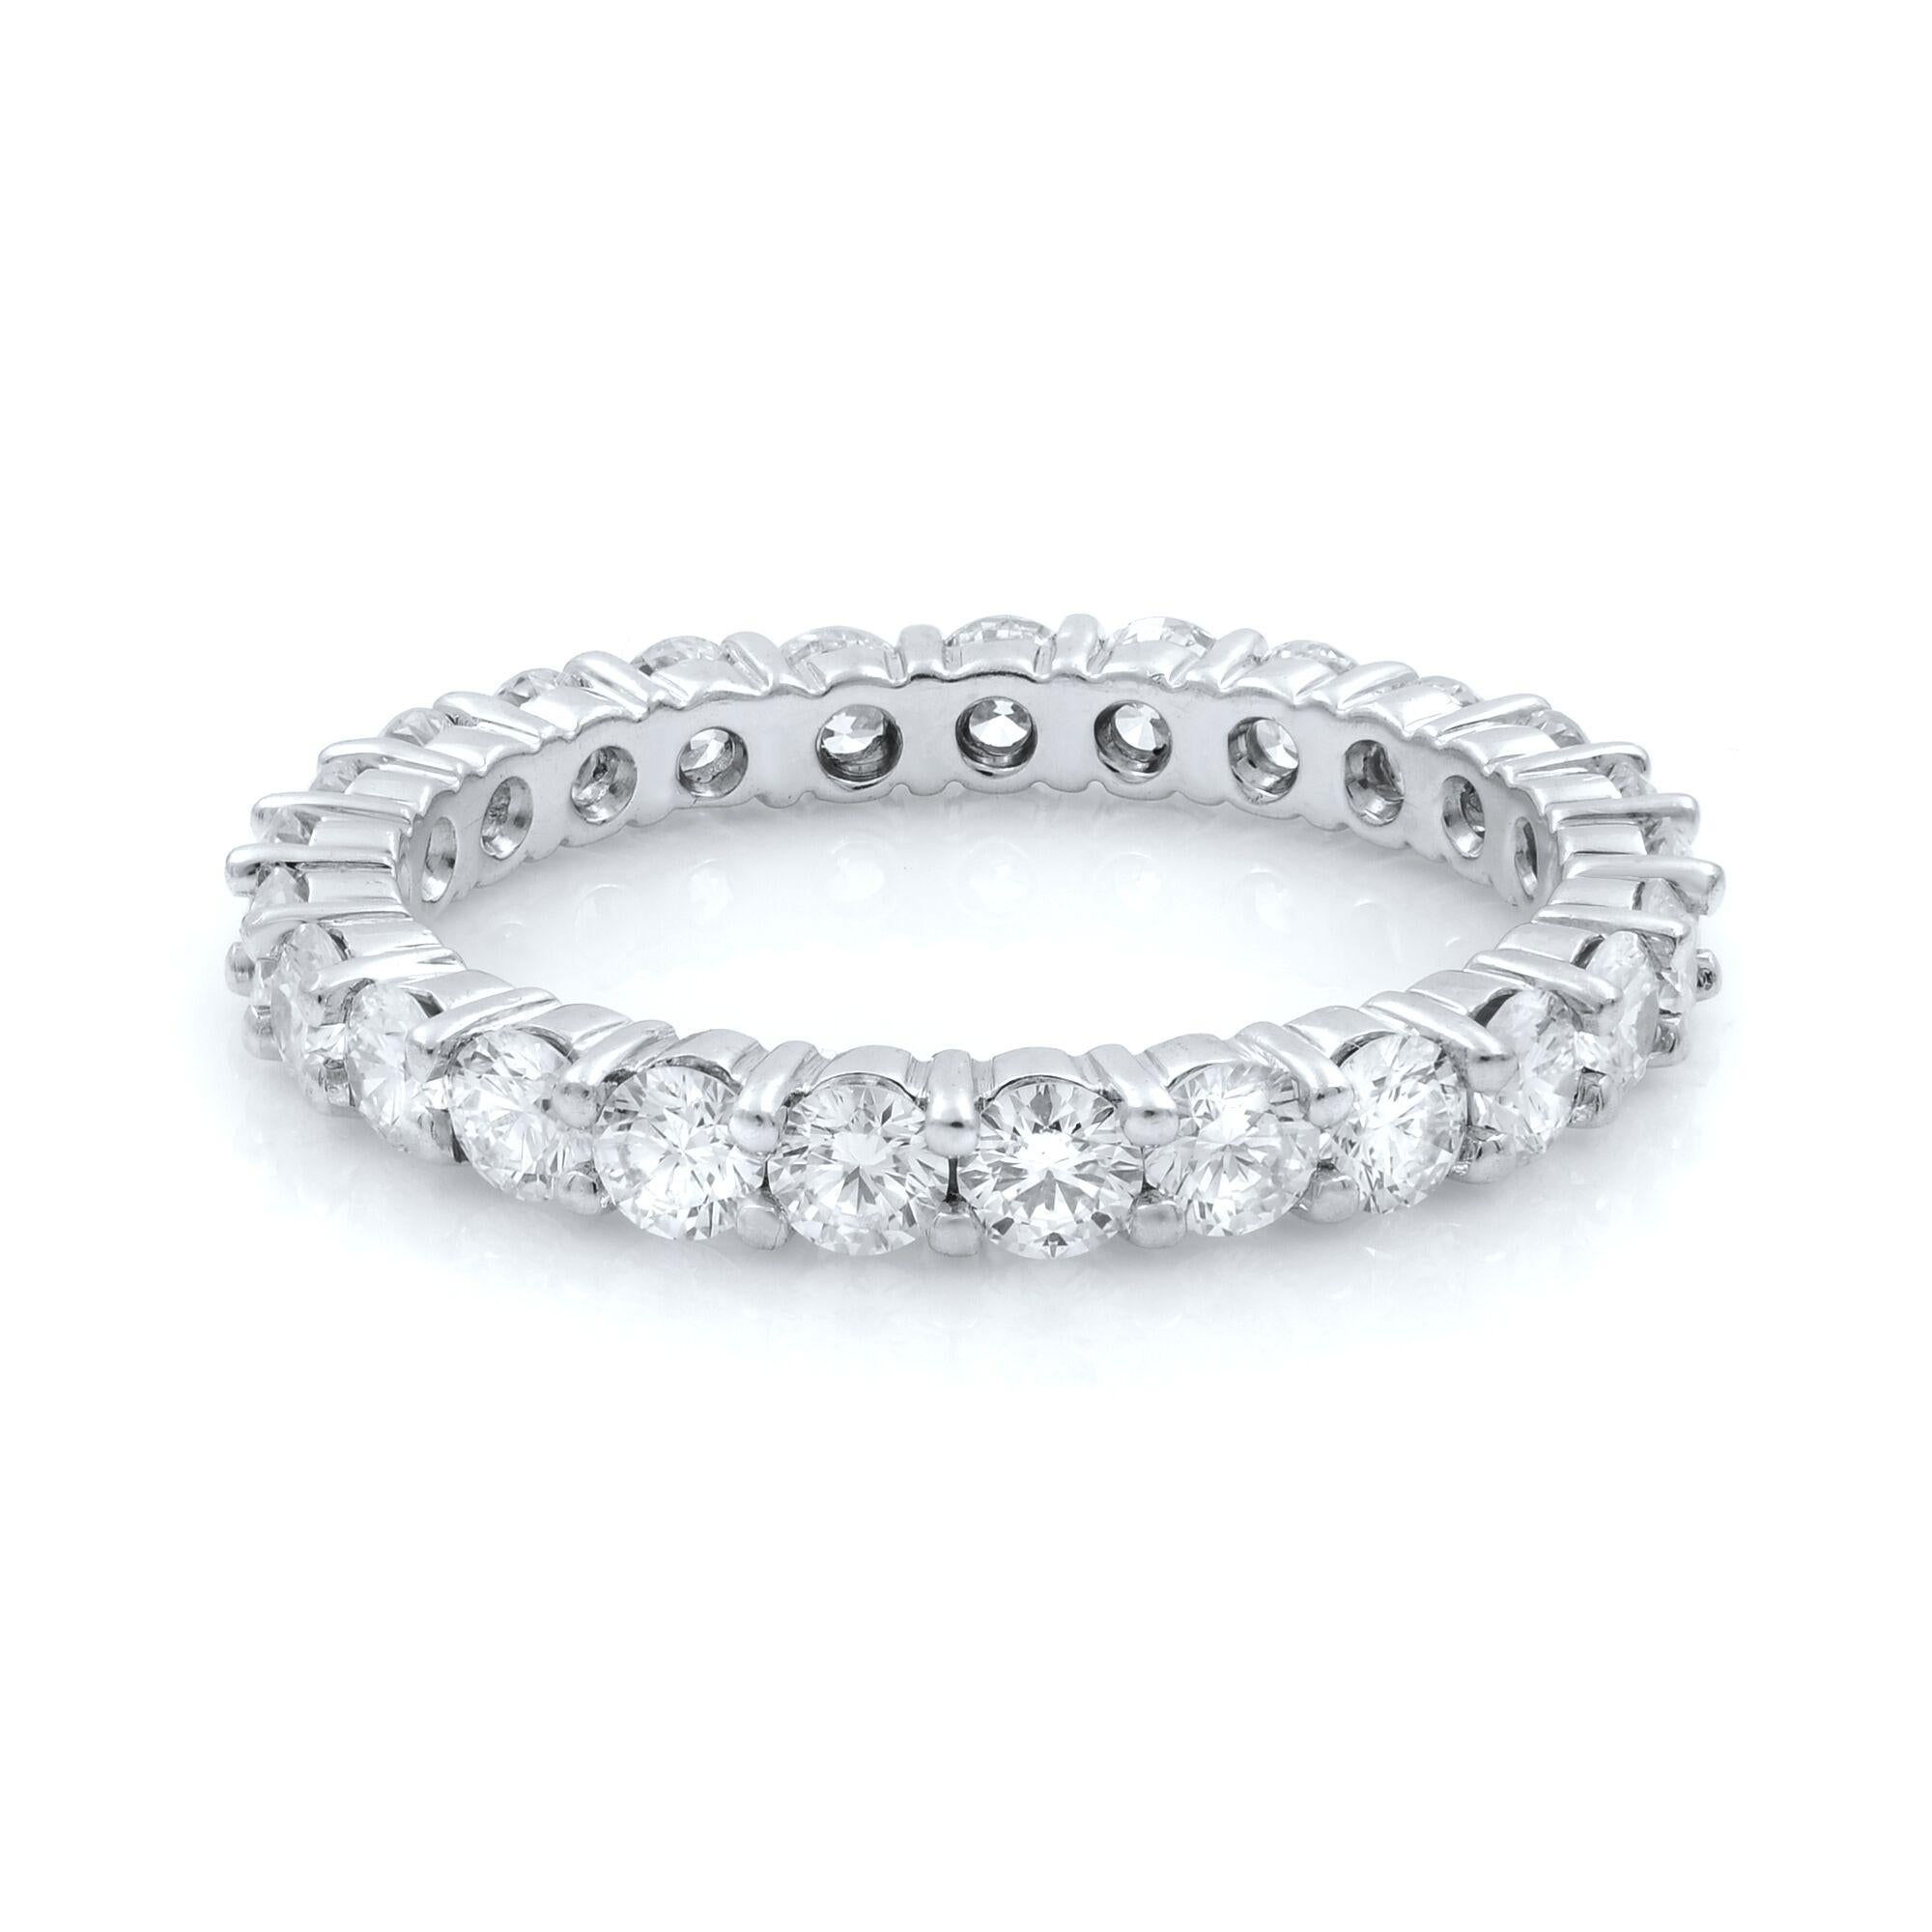 Comes with a jewelry box.This classic diamond eternity ring features round cut sparkling diamonds in a prong setting, crafted in 14K white gold band. Diamonds are totaling 1.65cts. Band width: 2.50mm. The ring weighs 2.65 grams, it is size 7. This